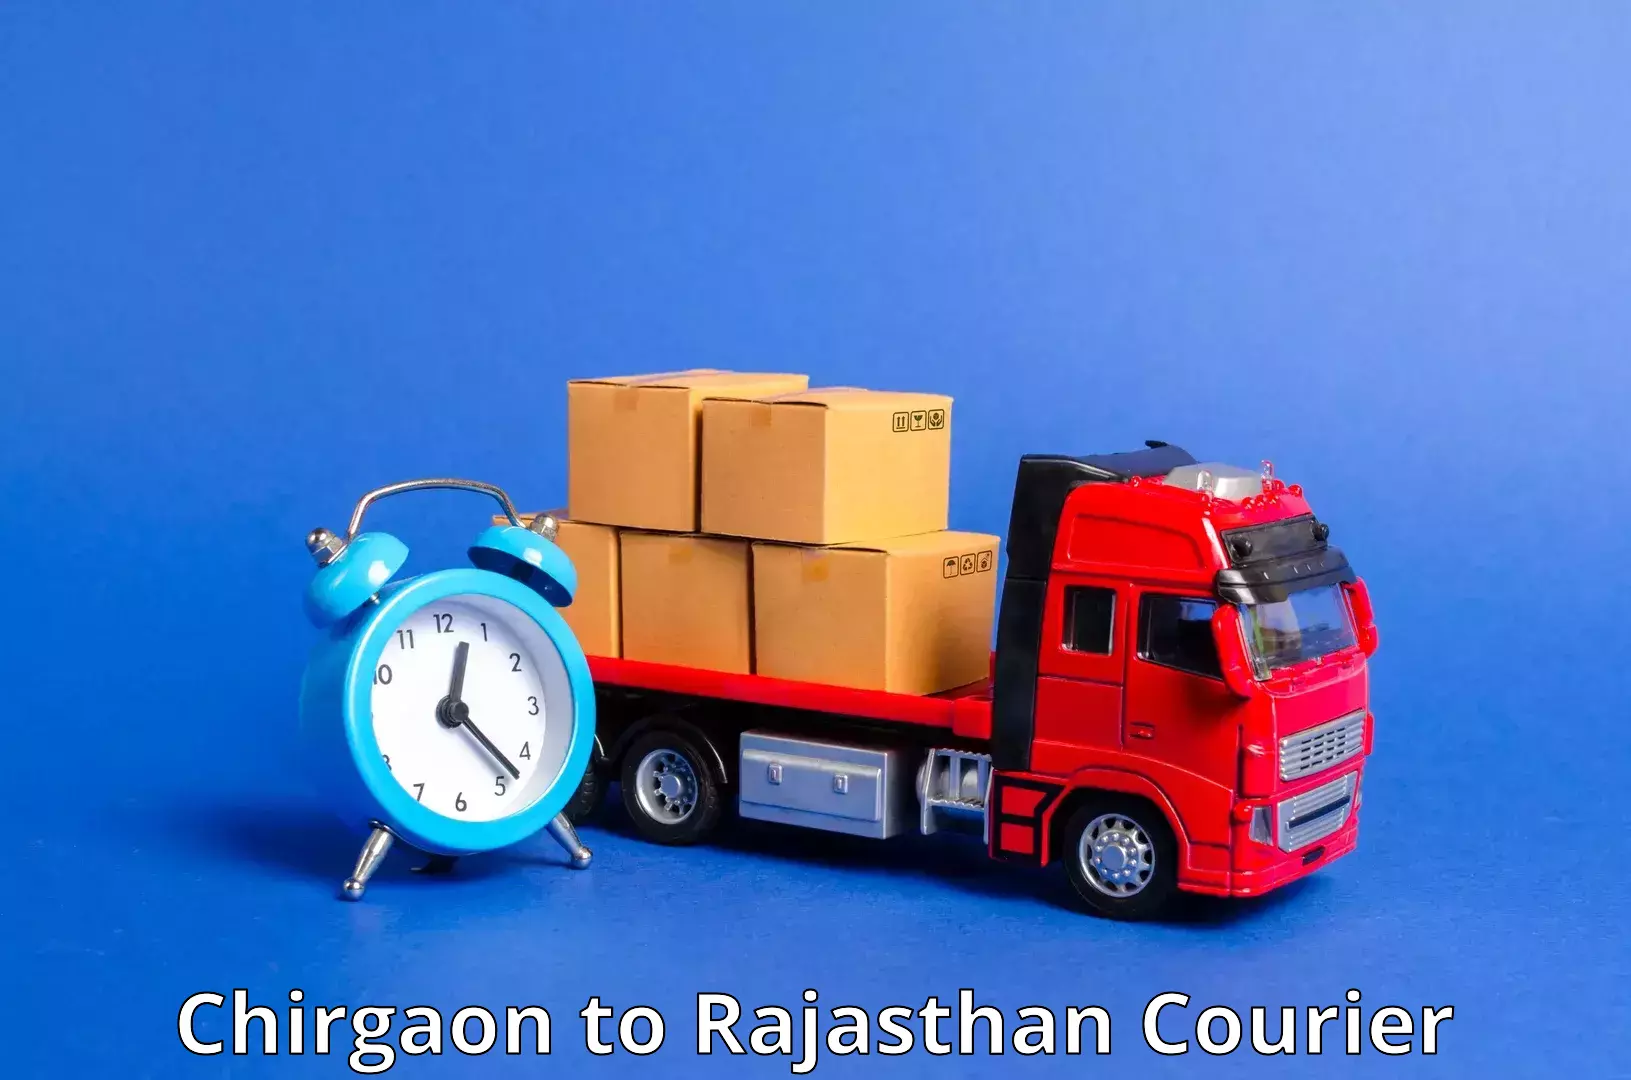 Courier service innovation Chirgaon to Dhorimana